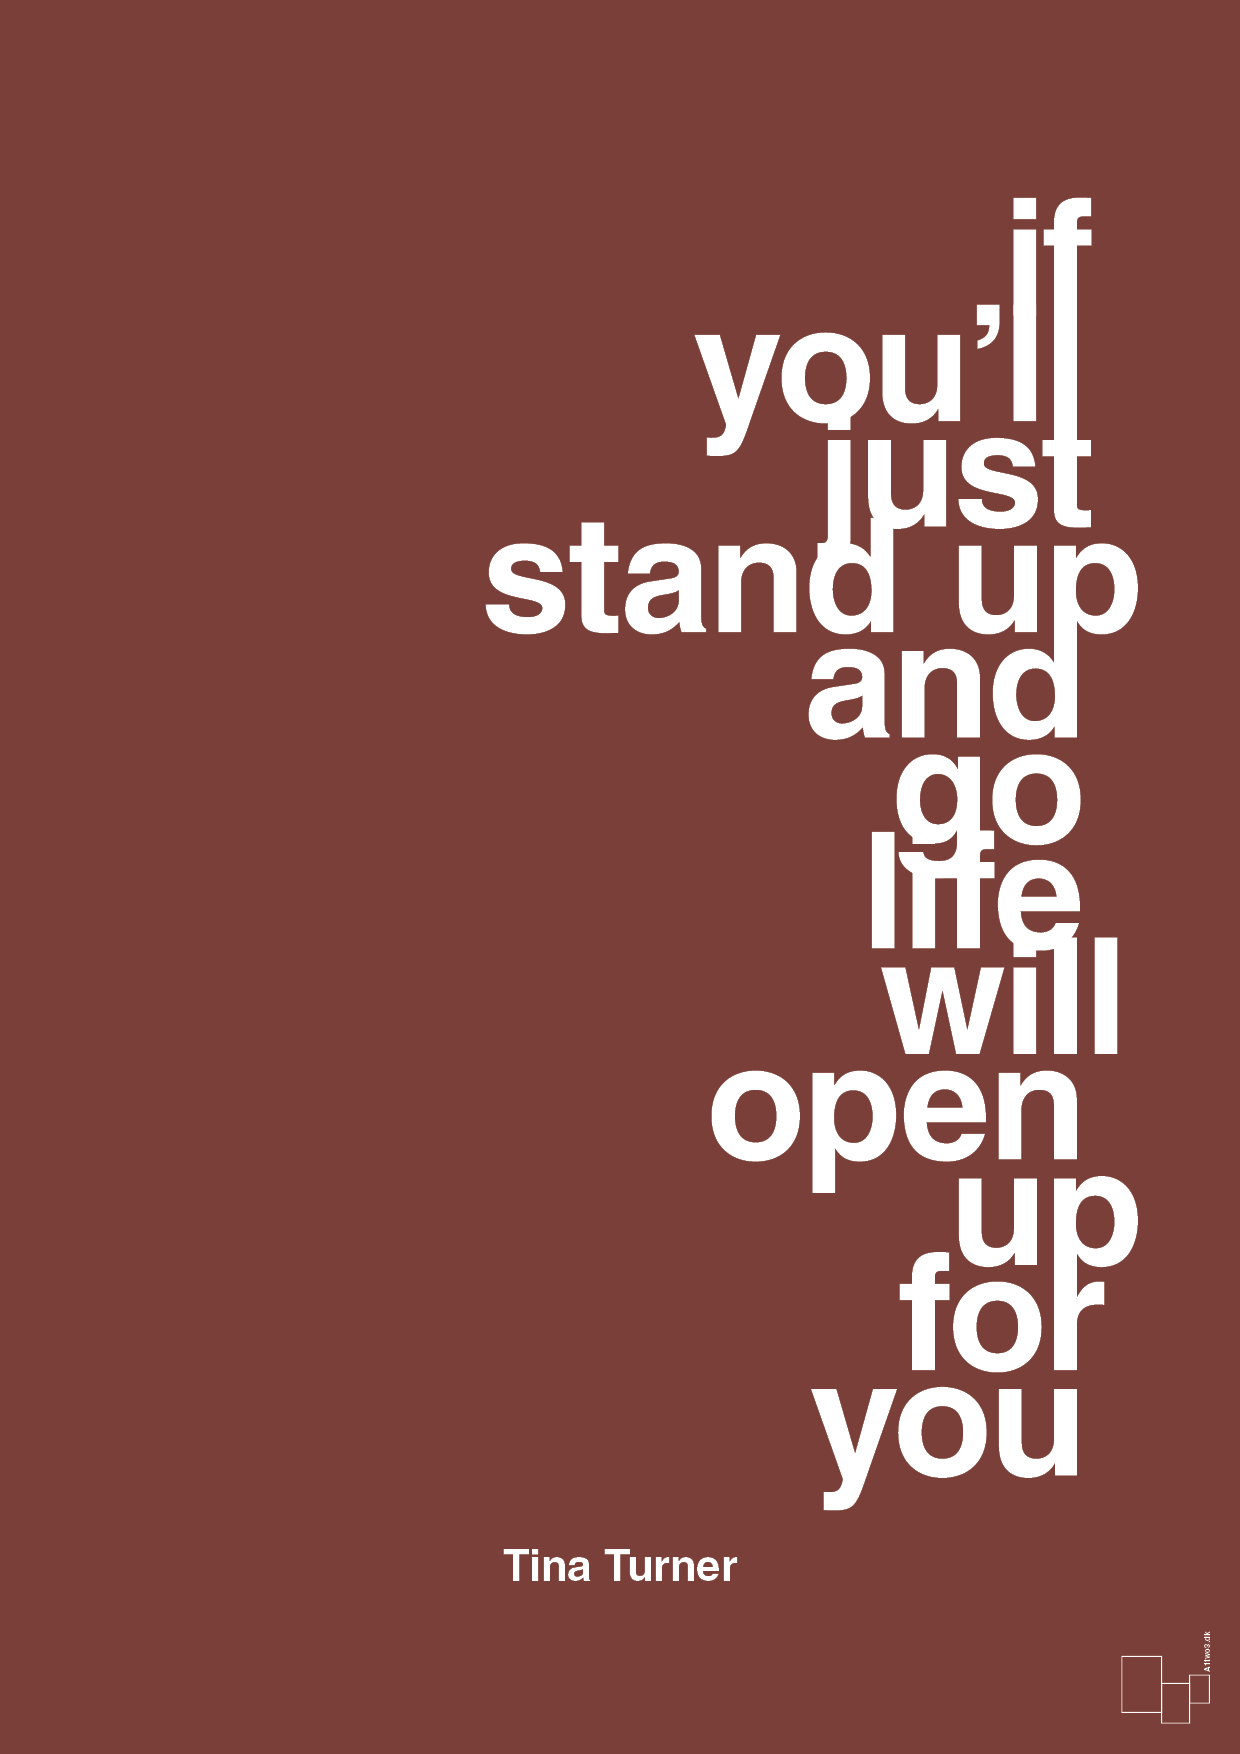 if you’ll just stand up and go life will open up for you - Plakat med Citater i Red Pepper